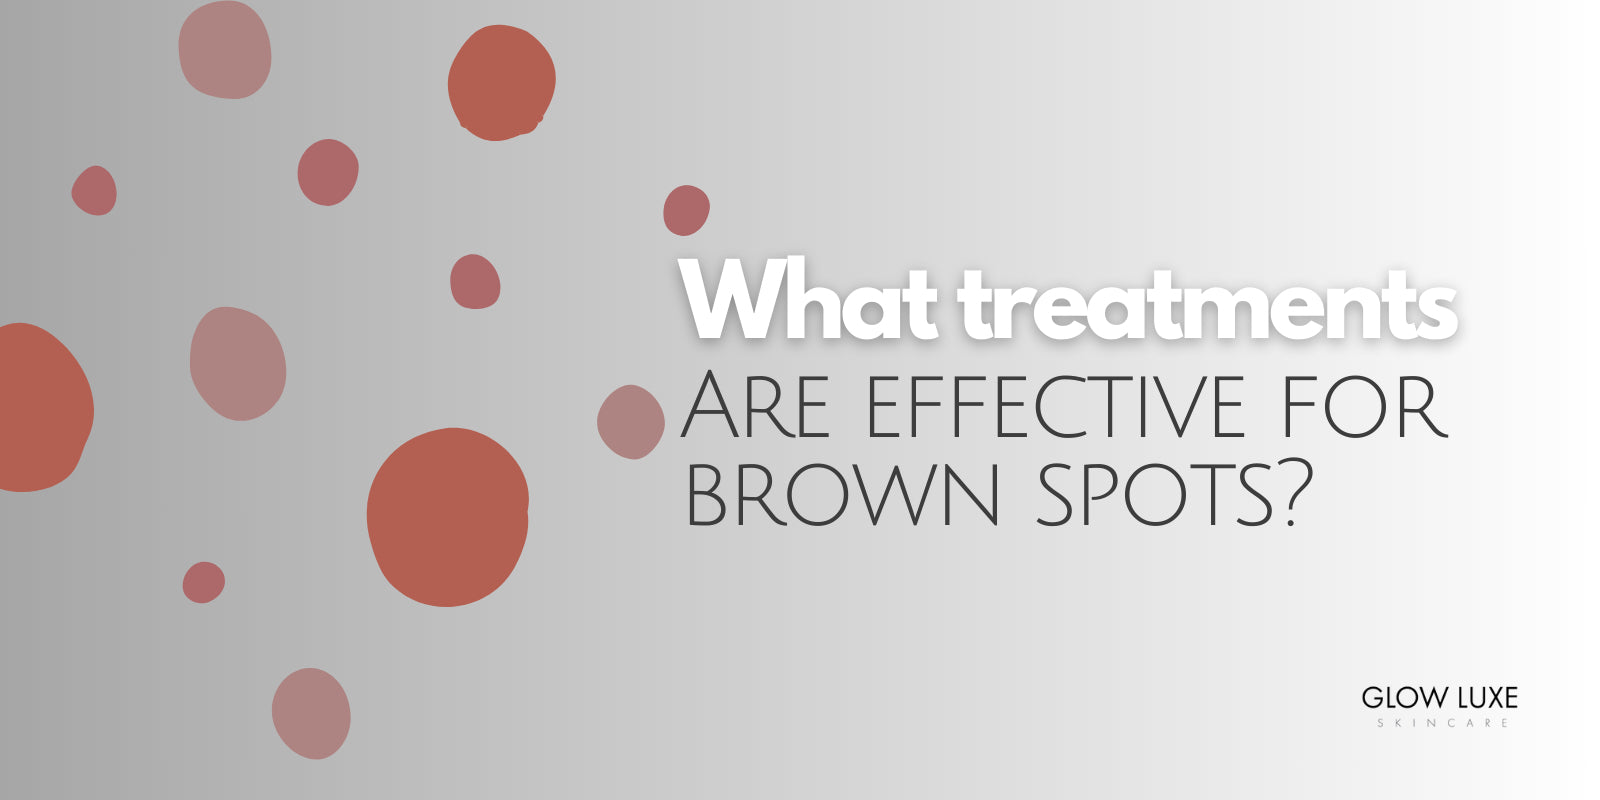 What is the best treatment for brown spots on the skin? Victoria BC